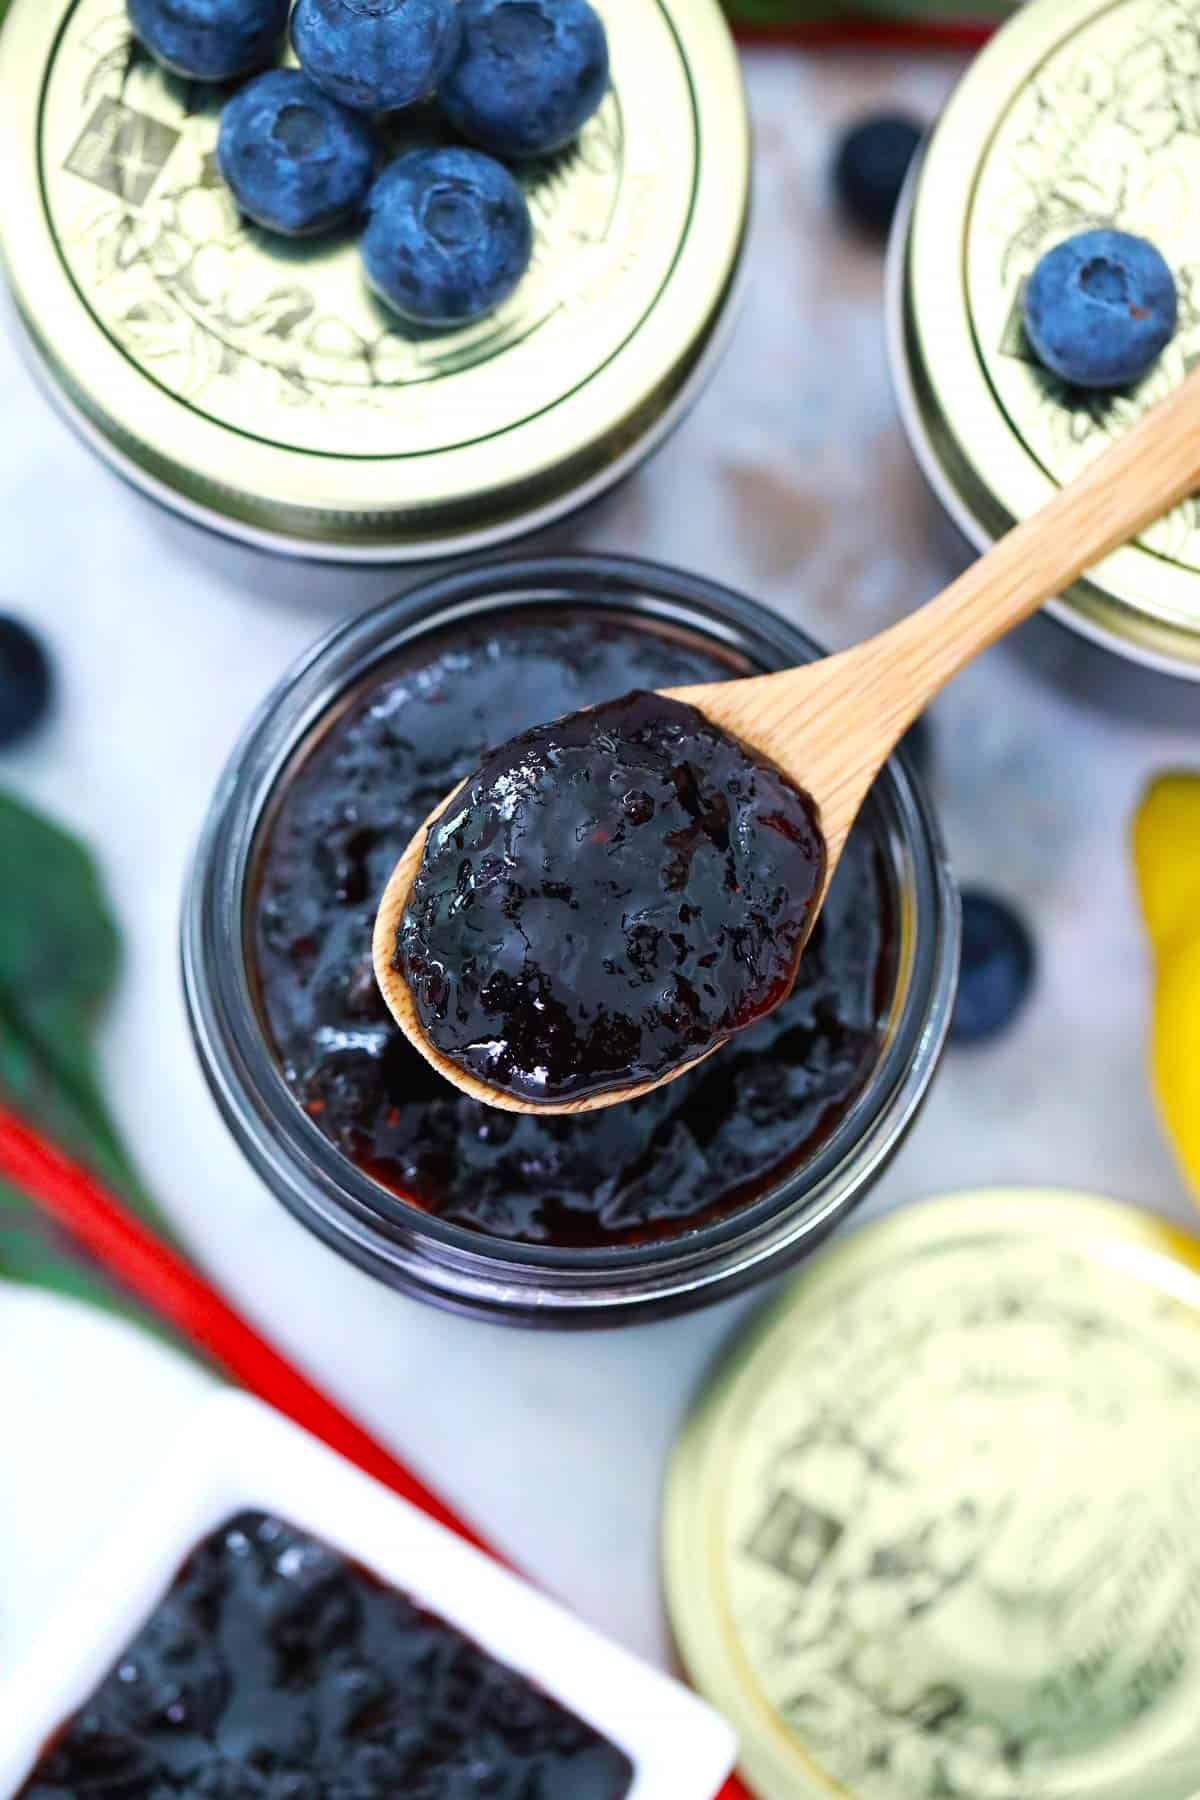 Spooning out blueberry rhubarb jam